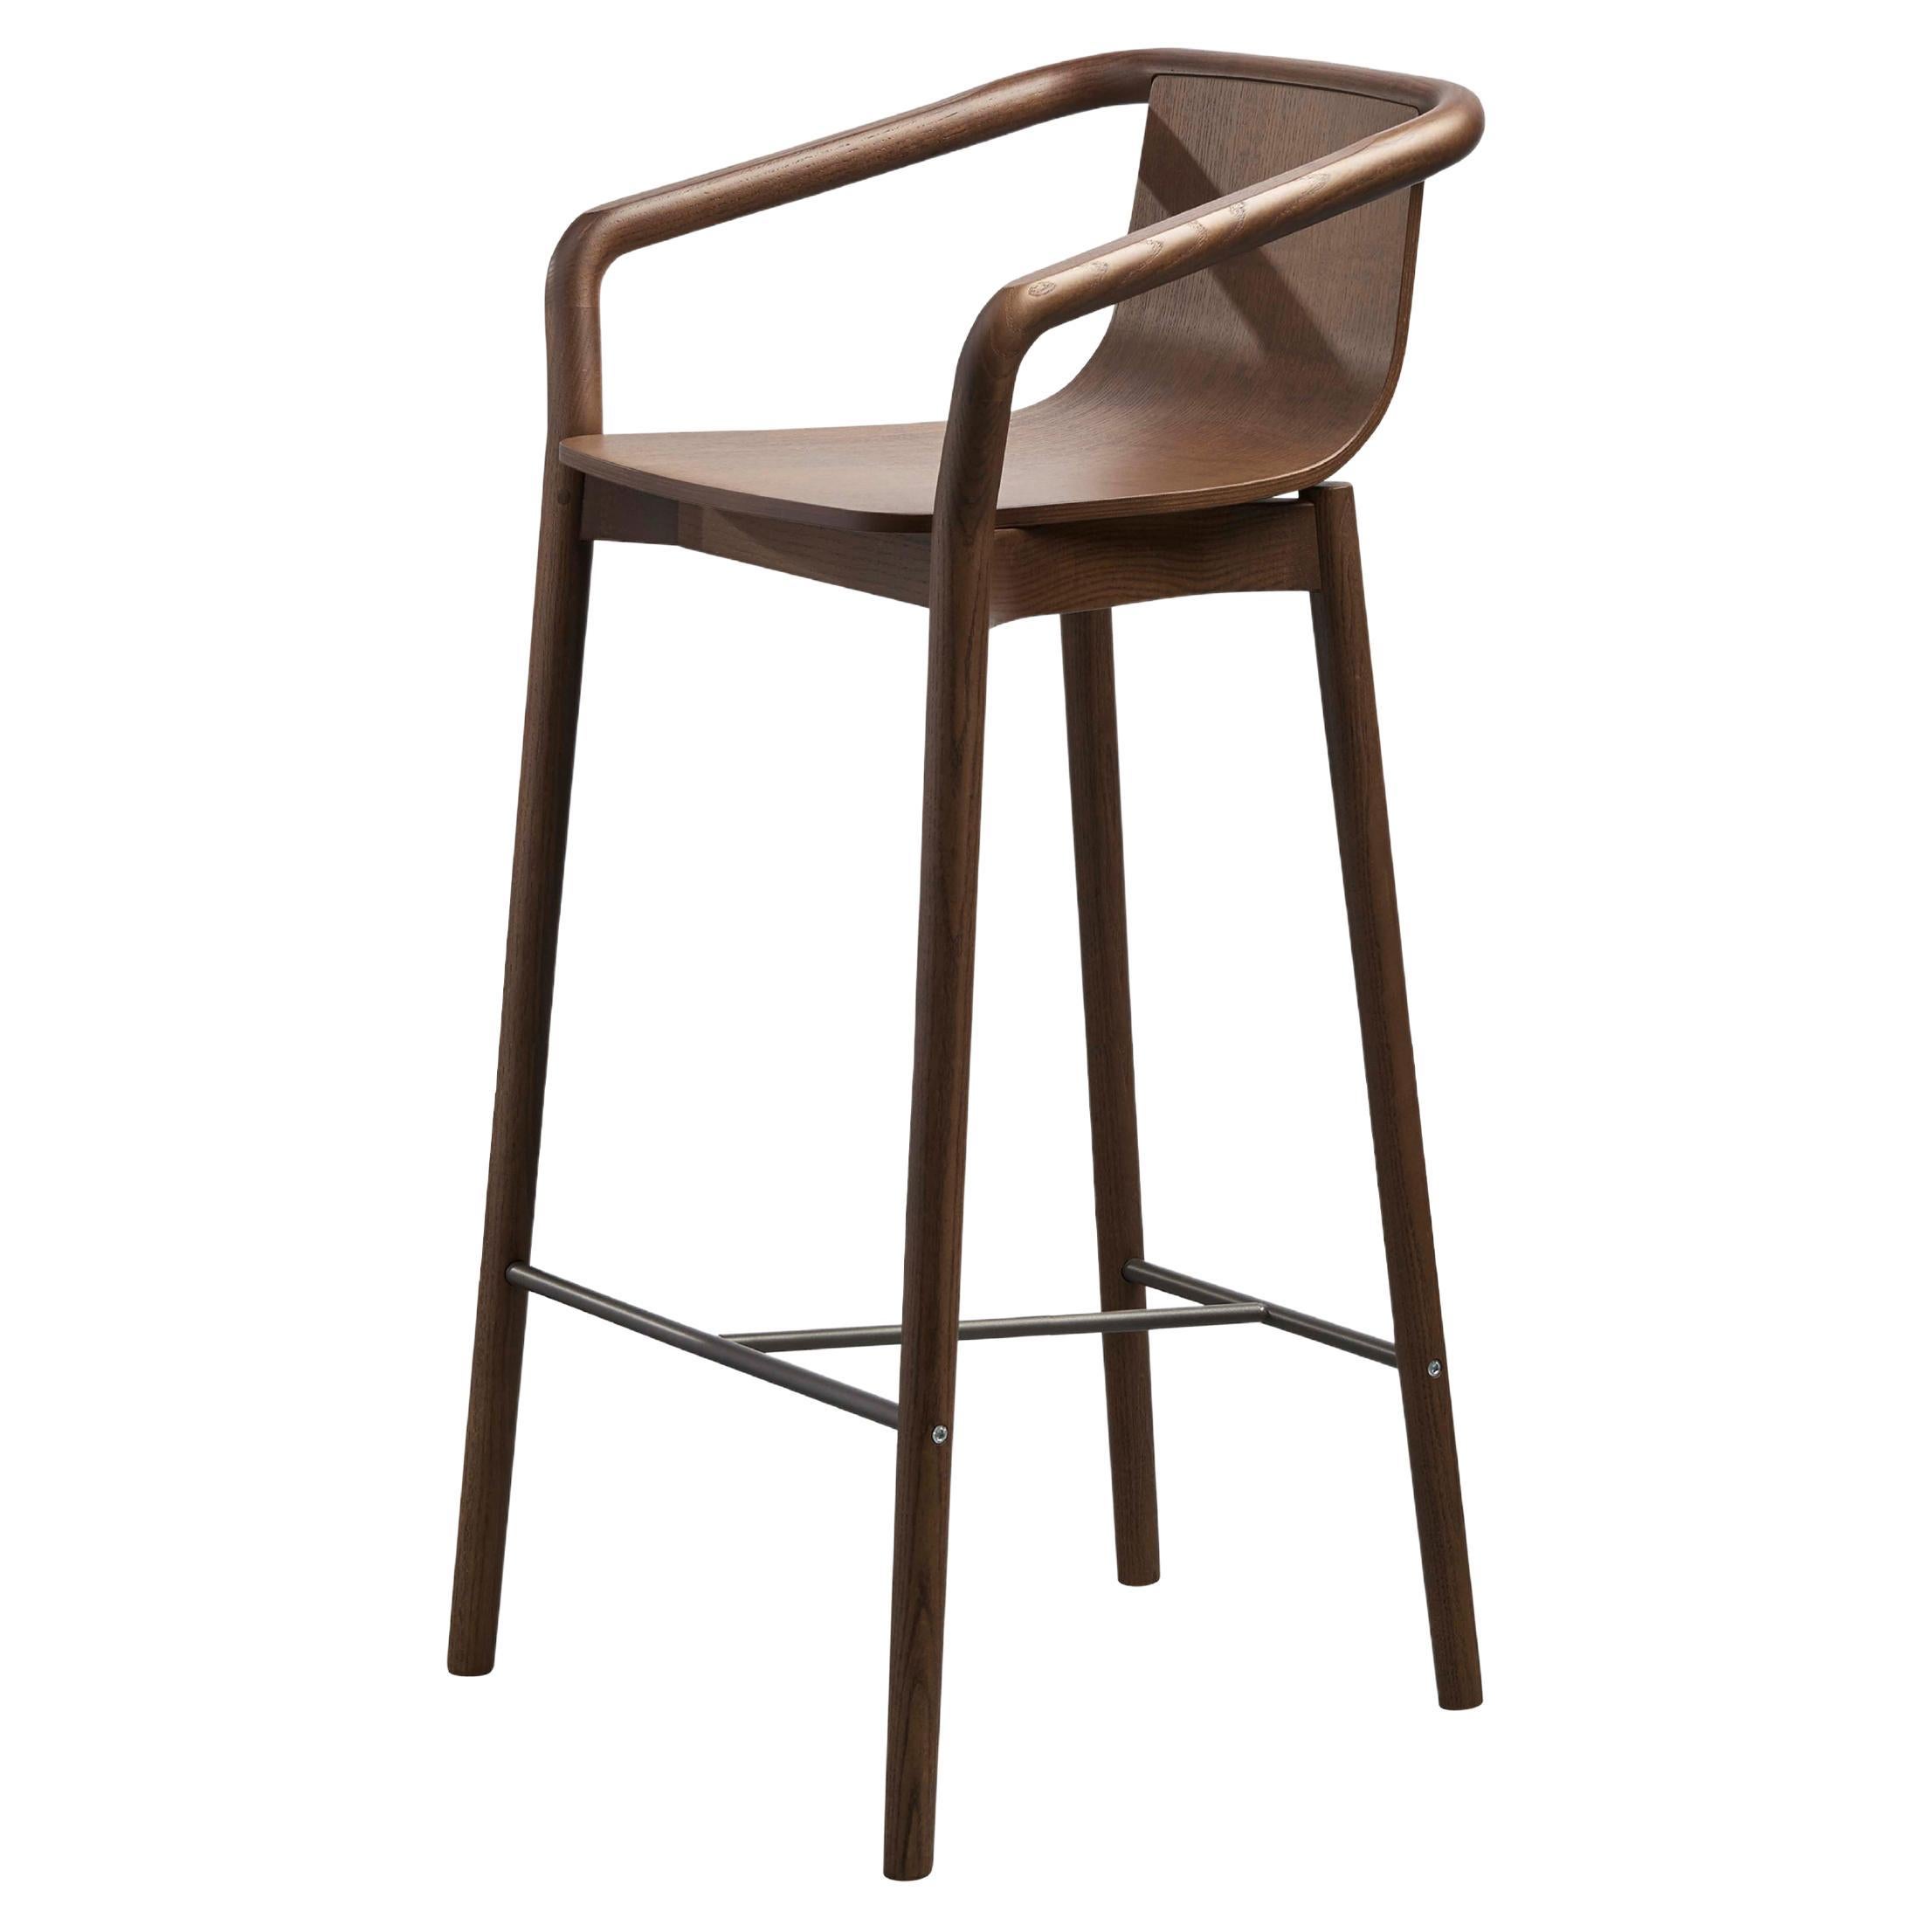 SP01 Thomas High Bar Stool in Walnut Stained Ash, Made in Italy